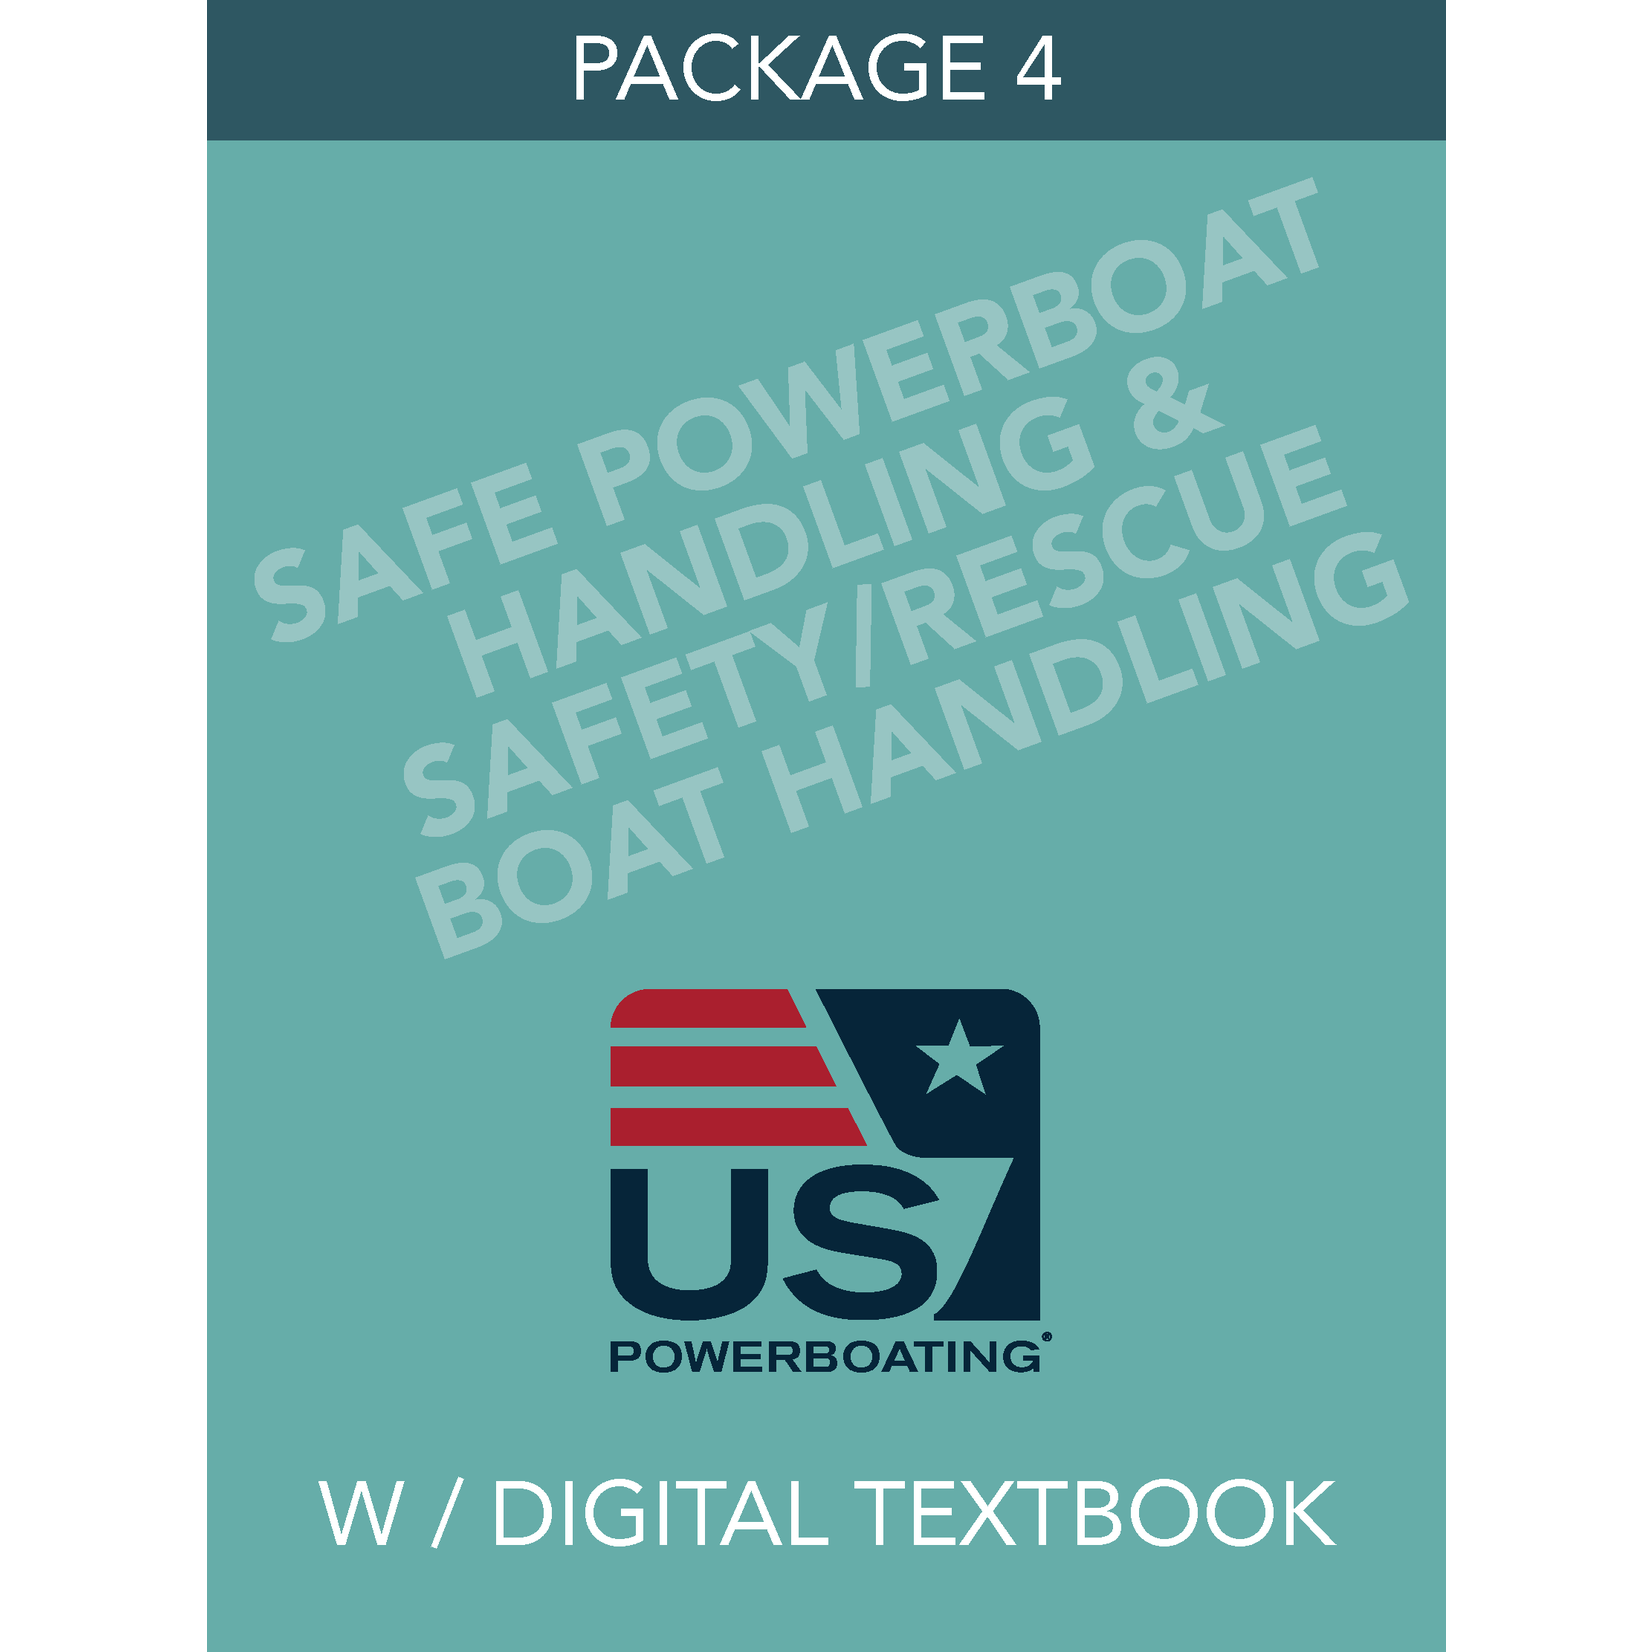 PACKAGE Safe Powerboat Handling & Safety/Rescue Boat Handling – Package 4 with Digital Textbook